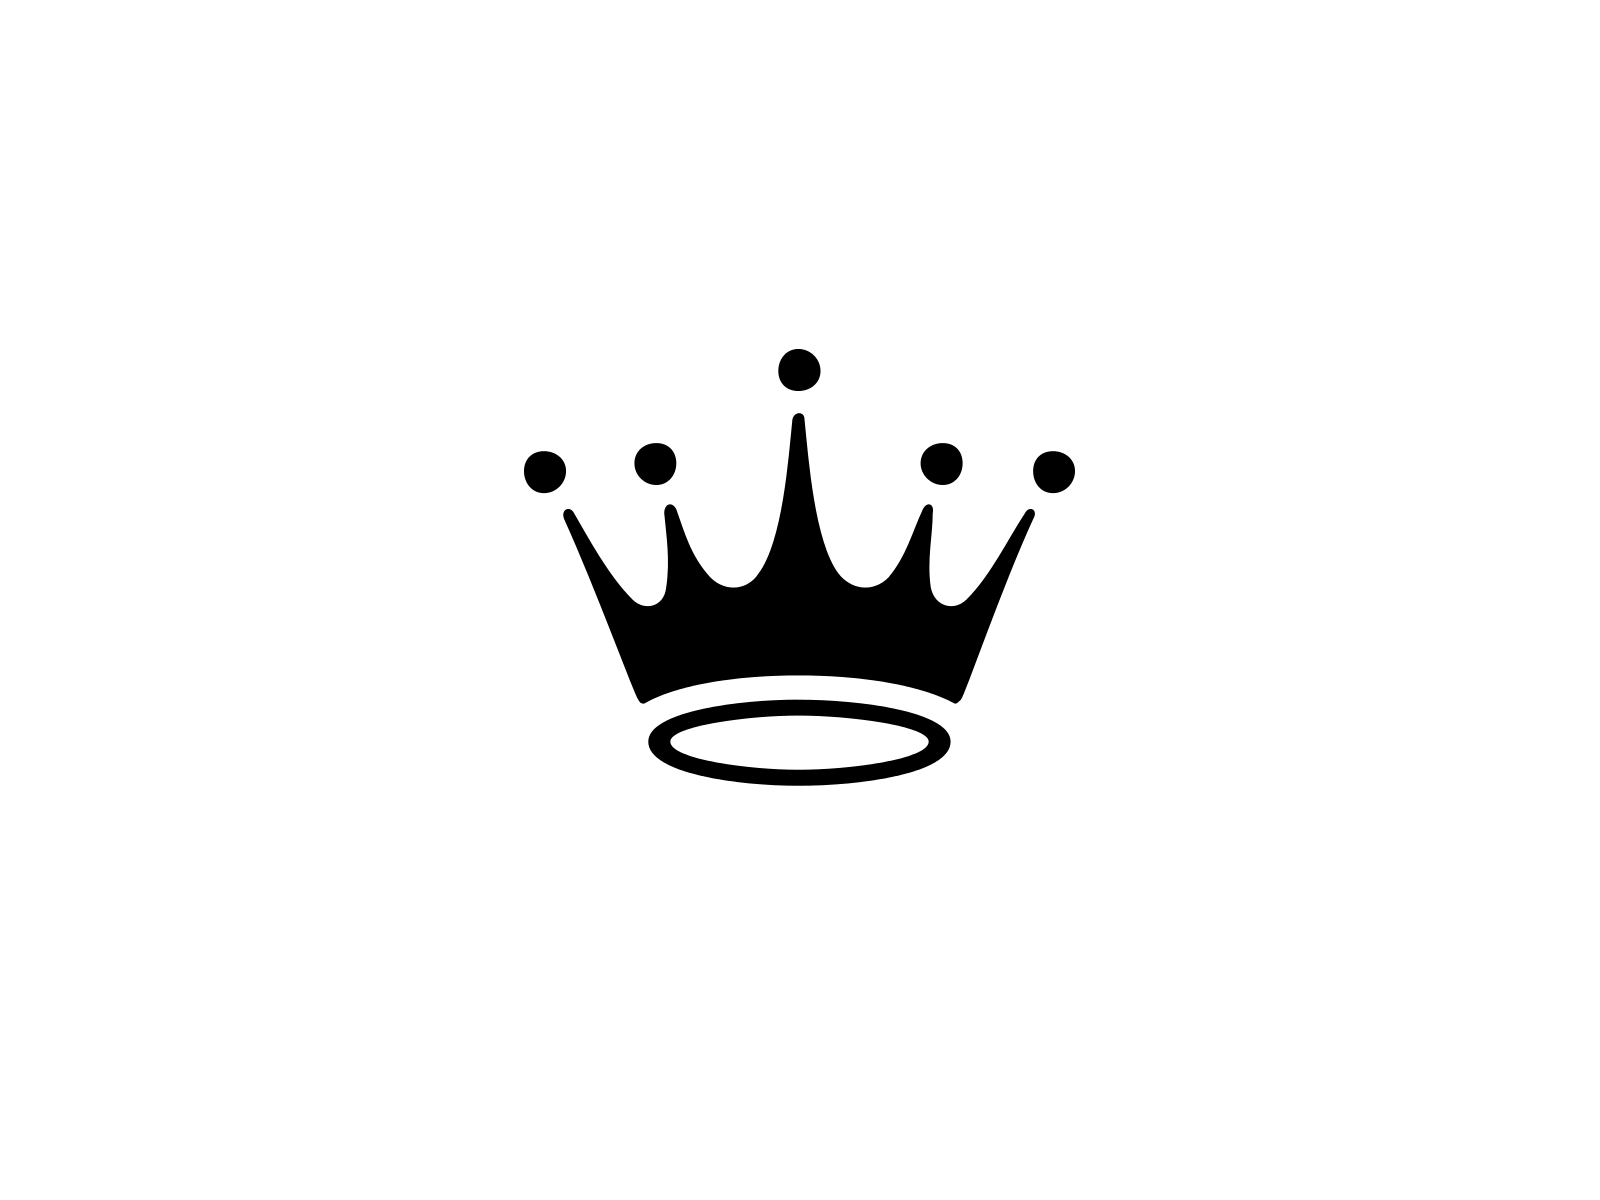 Black and White Crown Logo - Black and white crown png royalty free library queen - RR collections